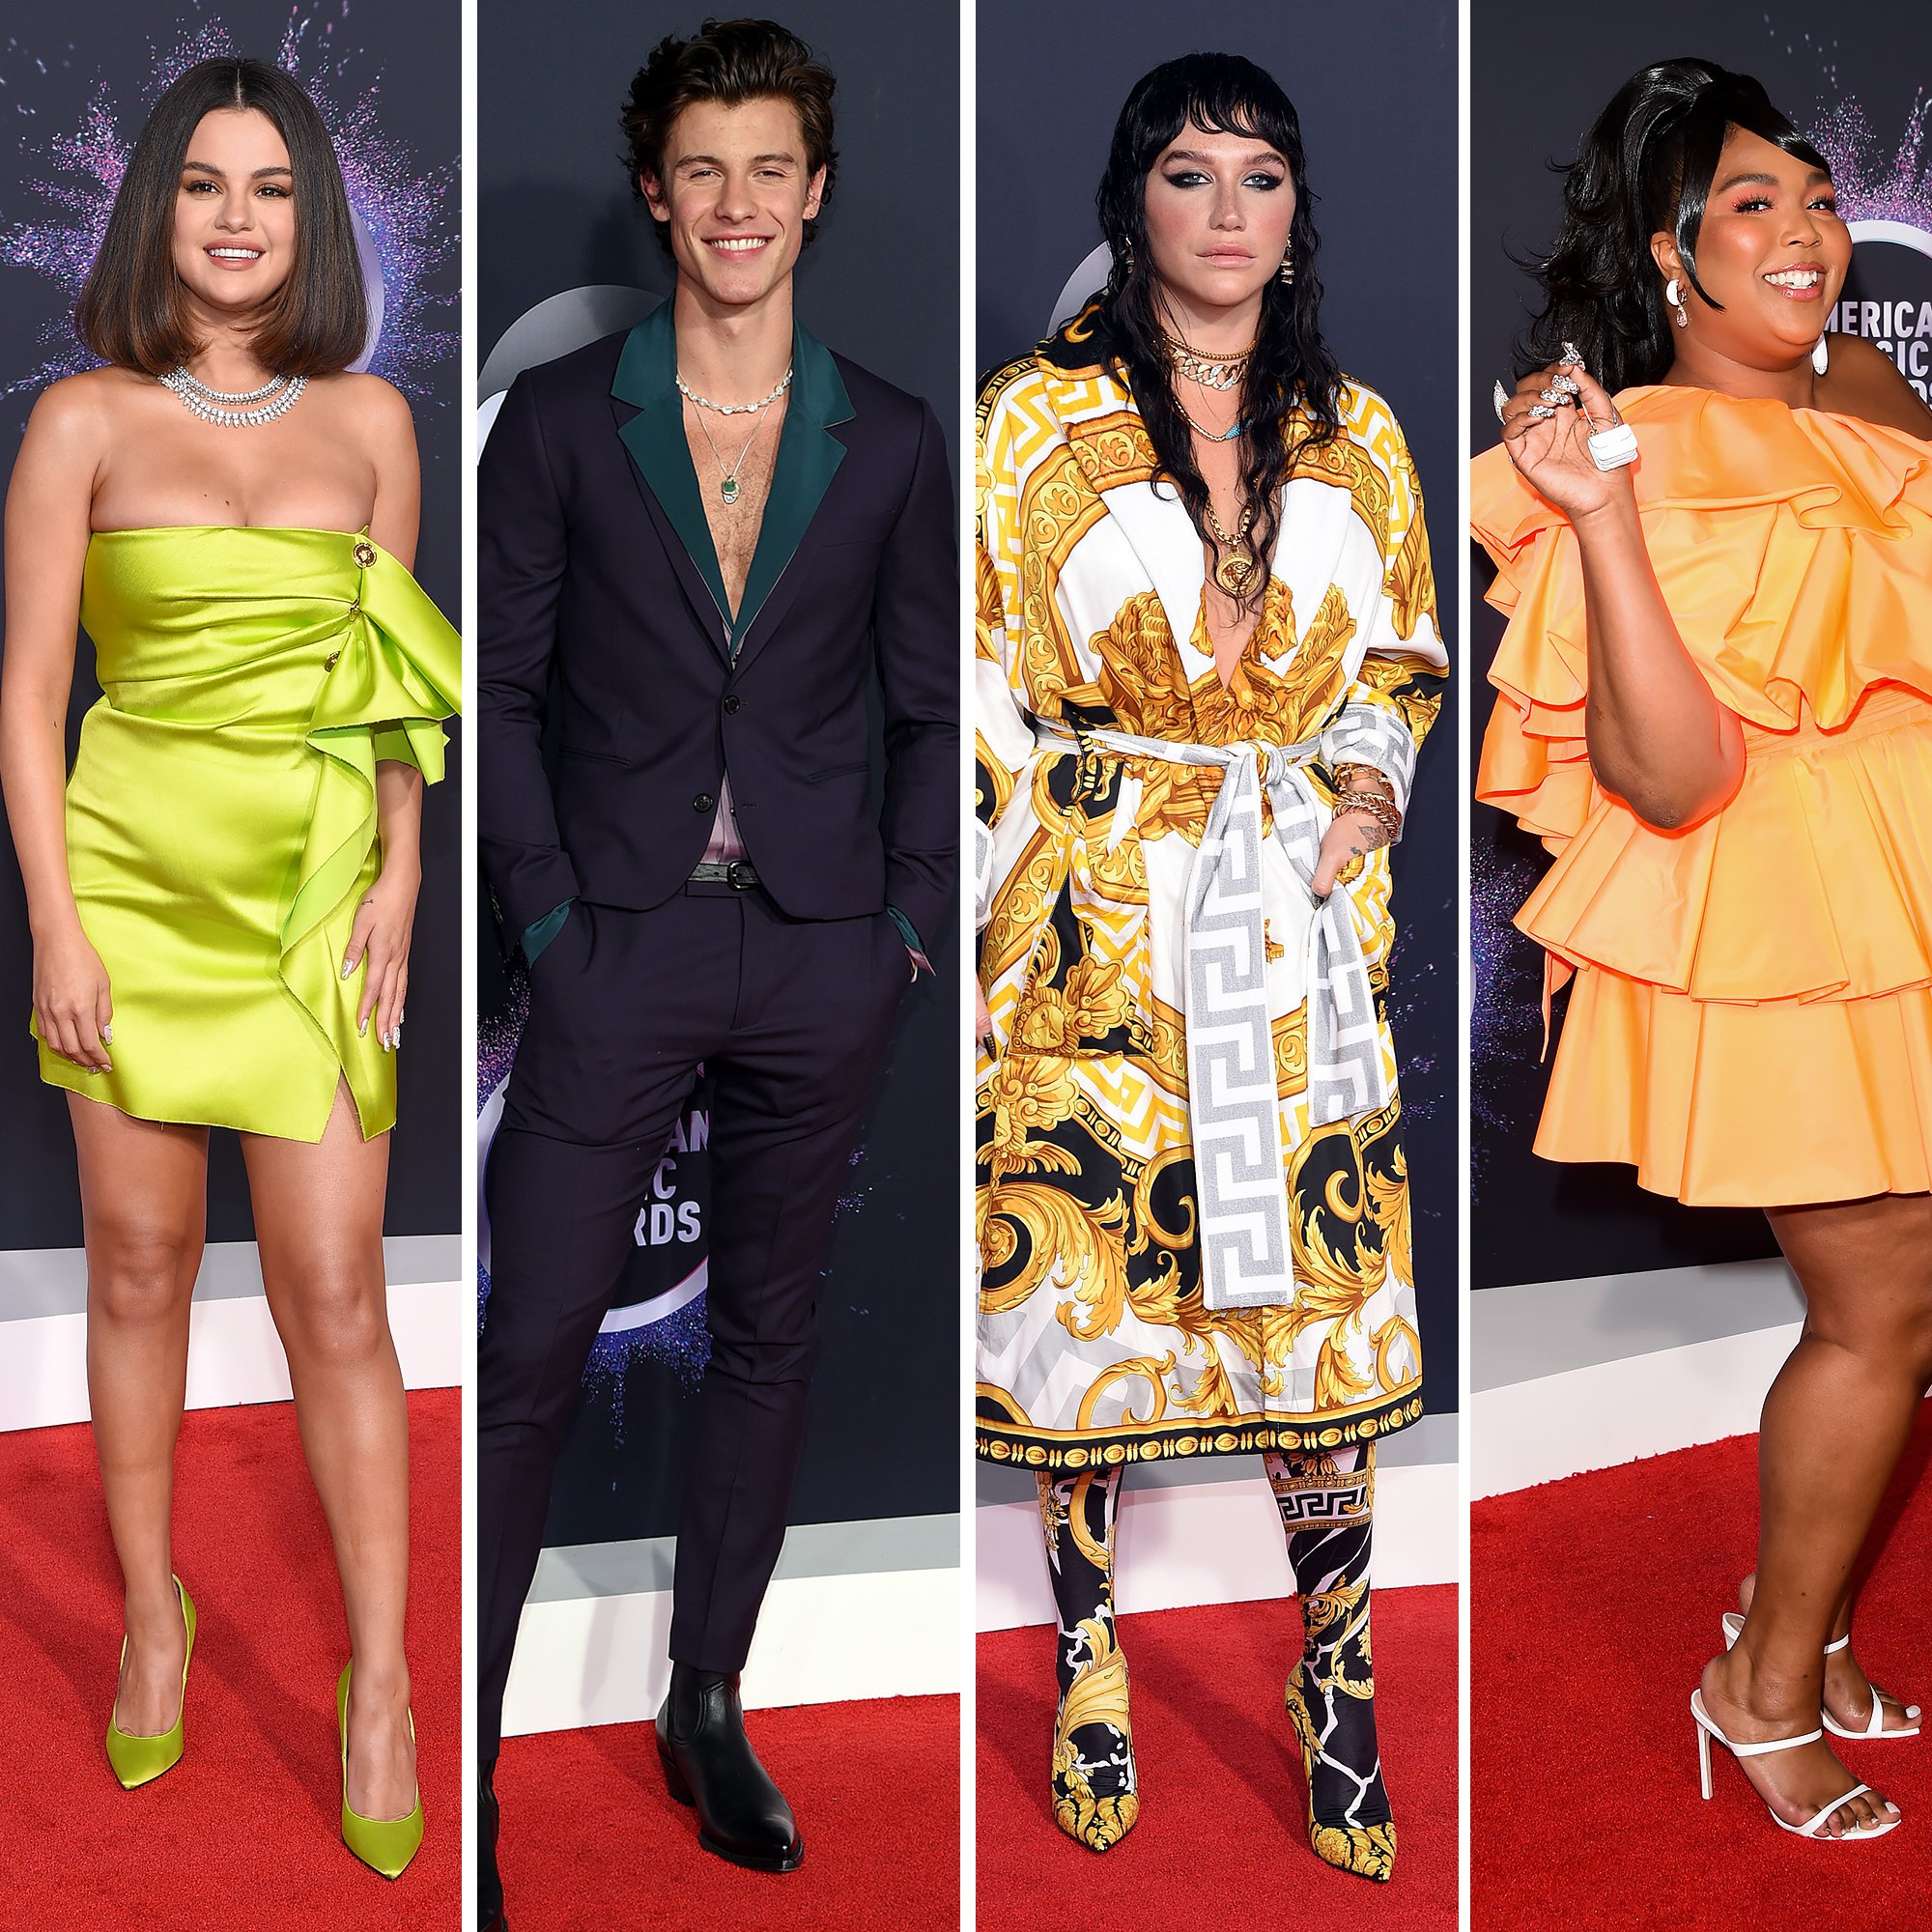 2019 AMAs Red Carpet Photo Gallery